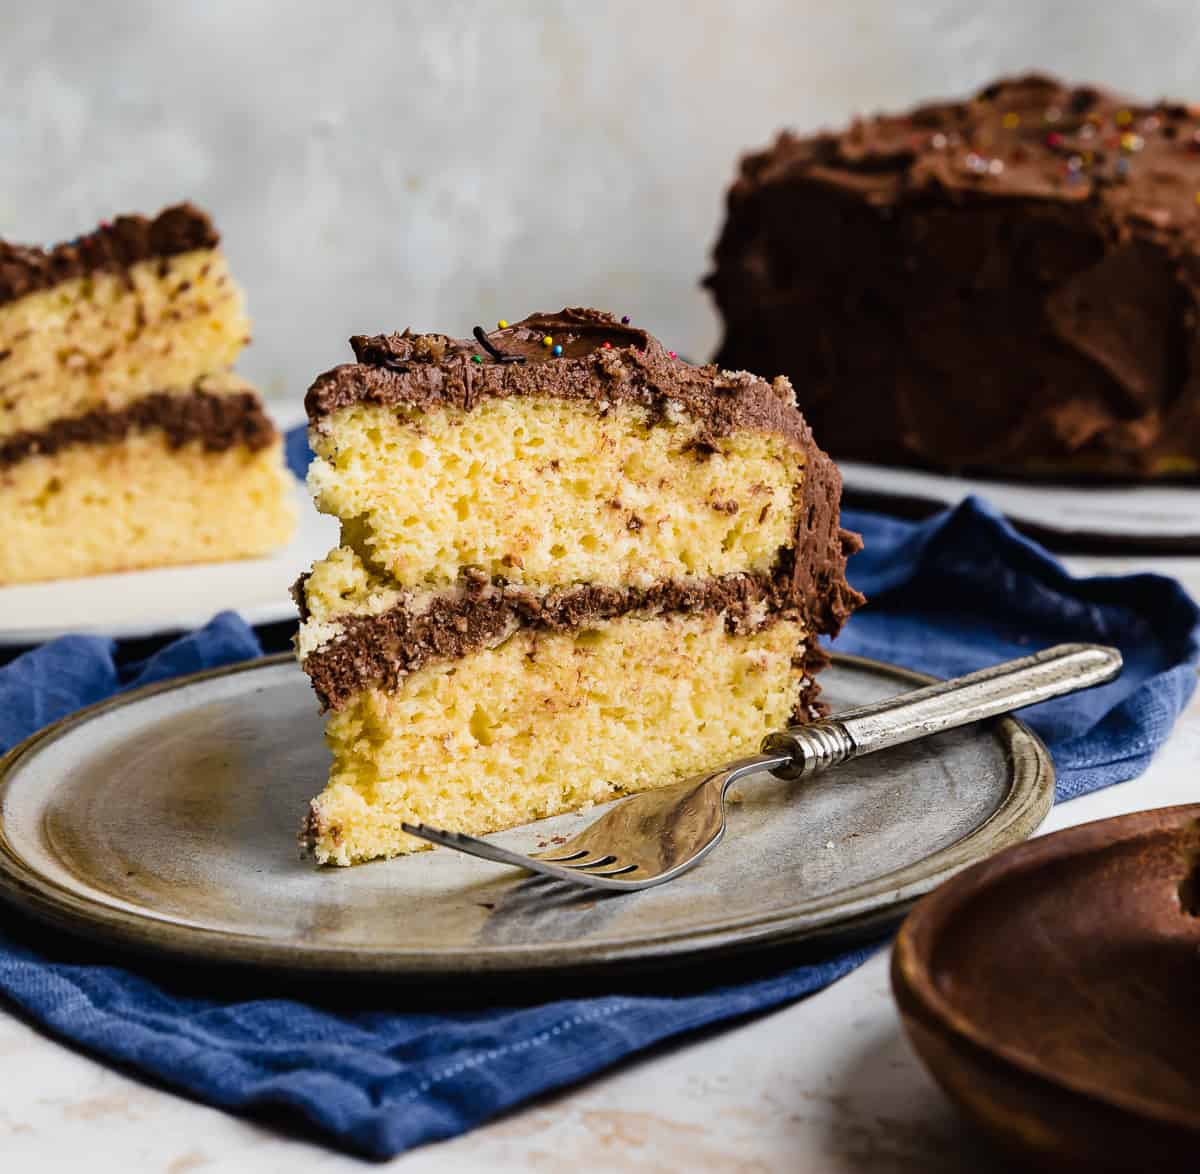 A slice of two layer yellow cake recipe with chocolate frosting on a gray plate.